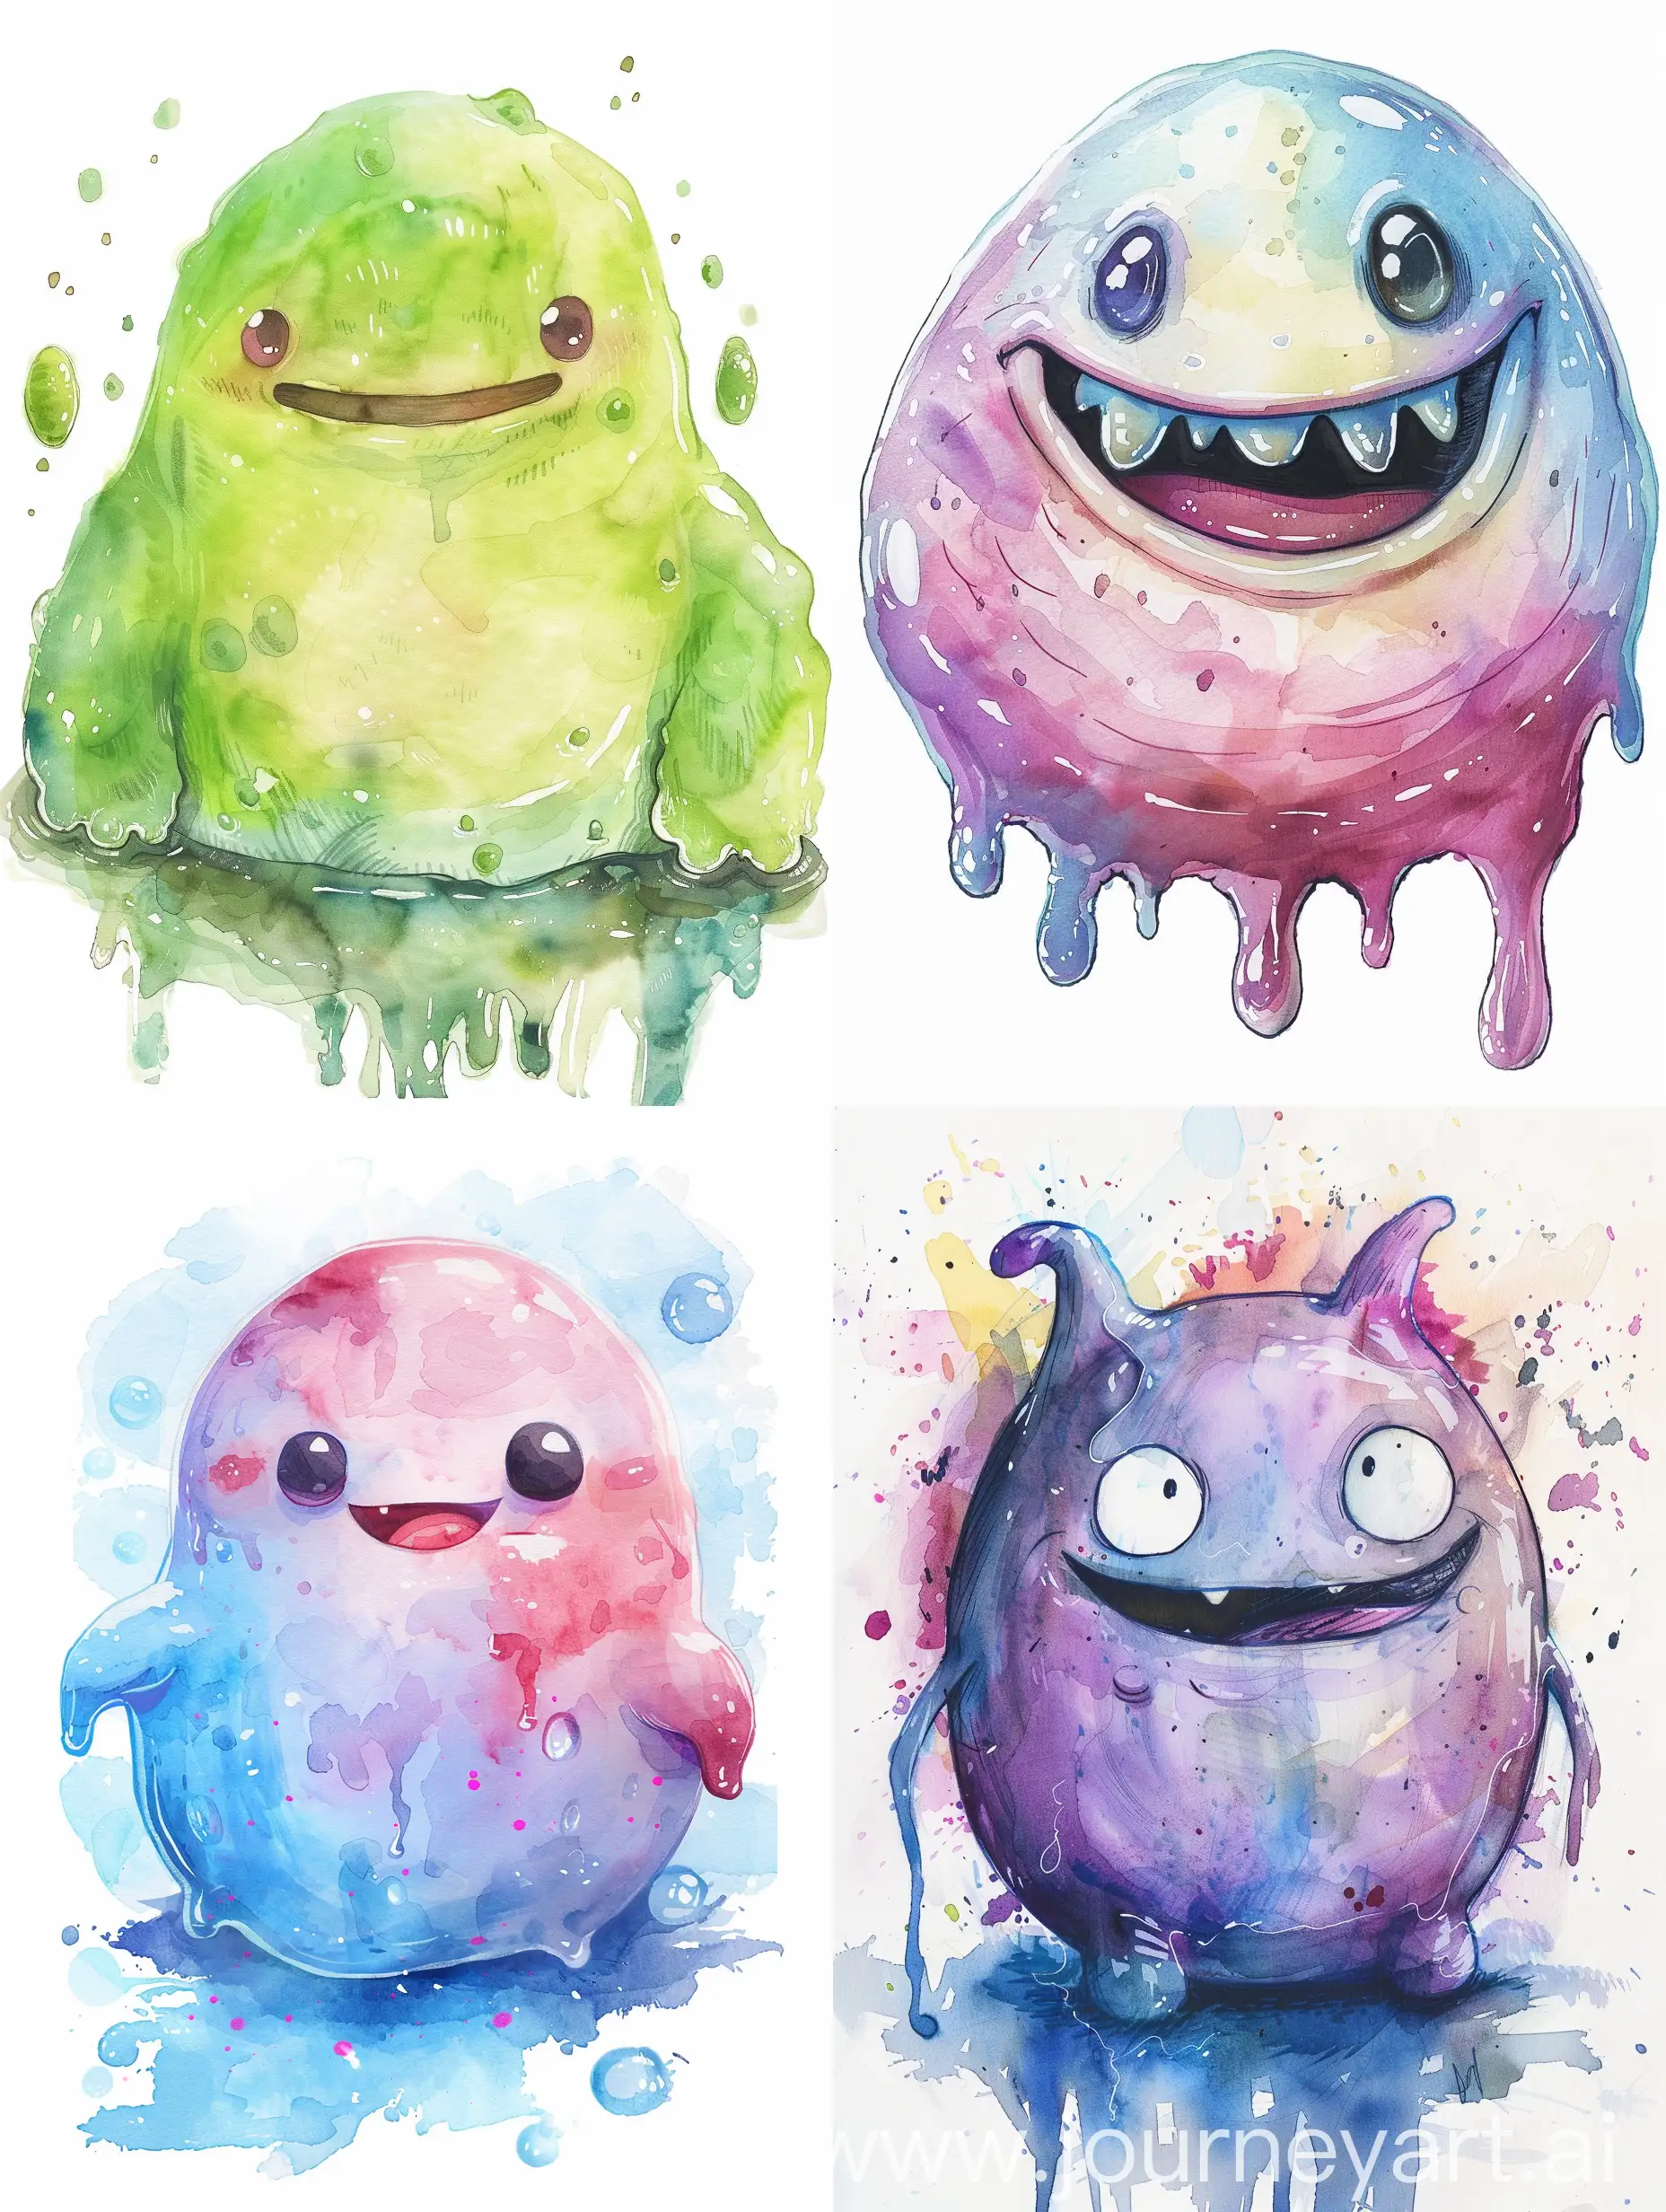 Adorable-Watercolor-Anime-Style-Slime-Monster